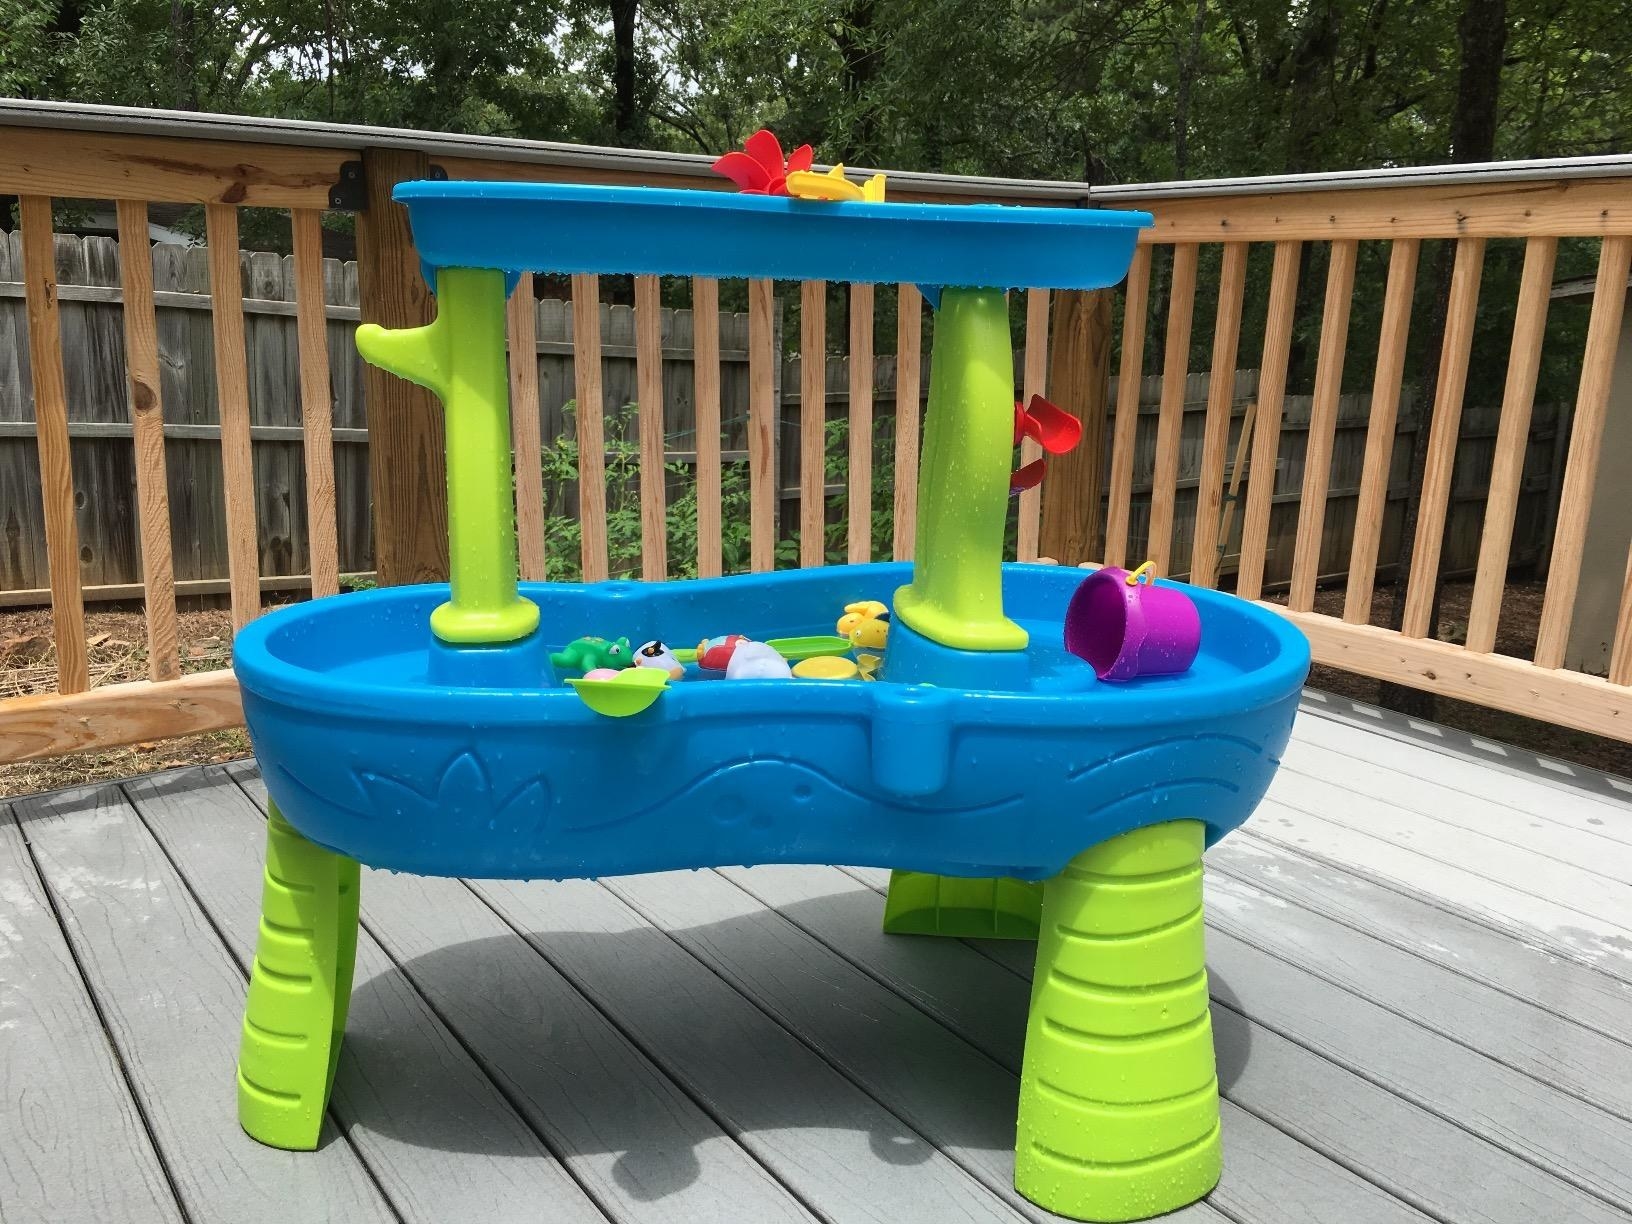 A teal and lime green water table with two levels and multi-colored toys inside